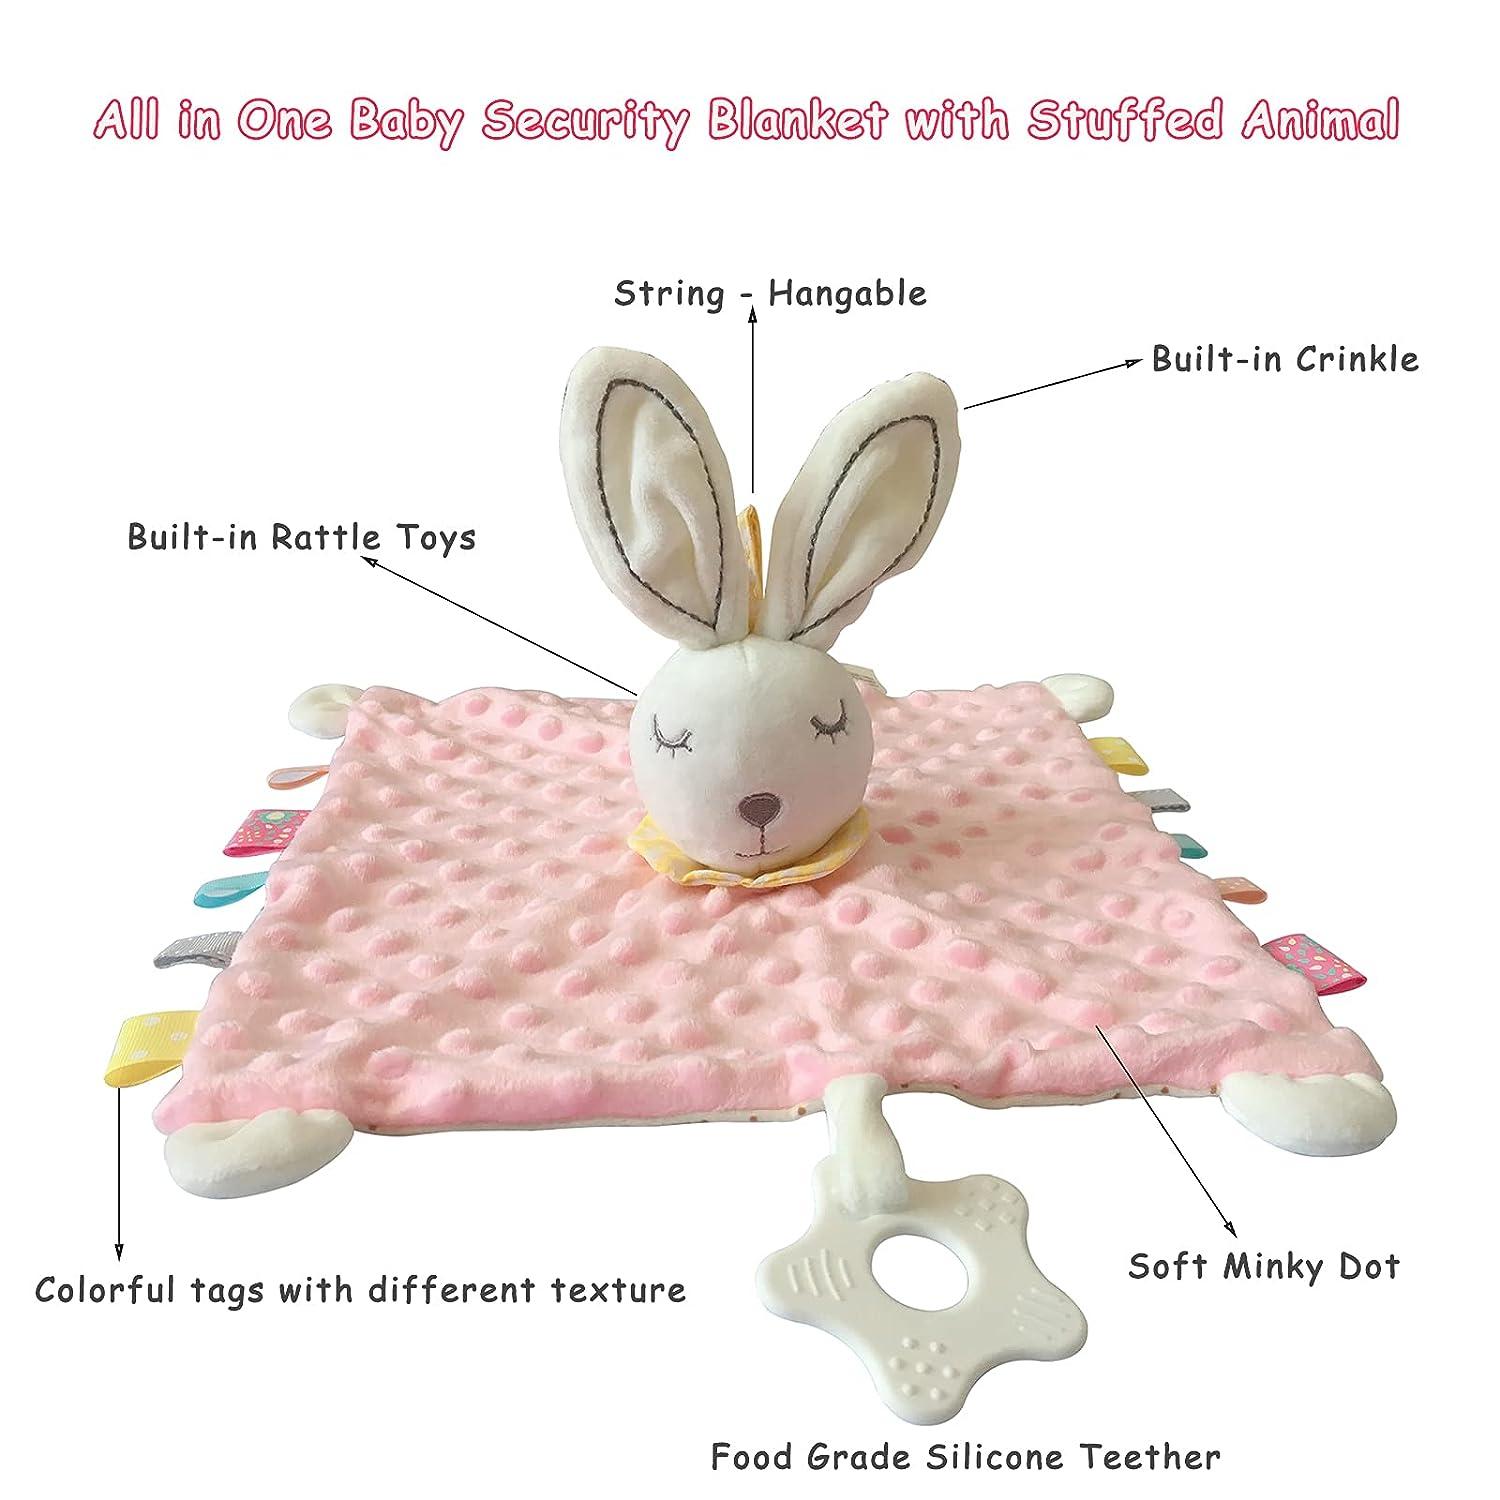 Stuffed Soft Dot Baby Blanket Tags Toy Blanket Blanket Soothing Security with Infant Teether for Super Animal Bunny Security Plush Upalupa Minky Nowborn Pink Baby Textured Colorful Lovey Security Puppy Sensory Taggy